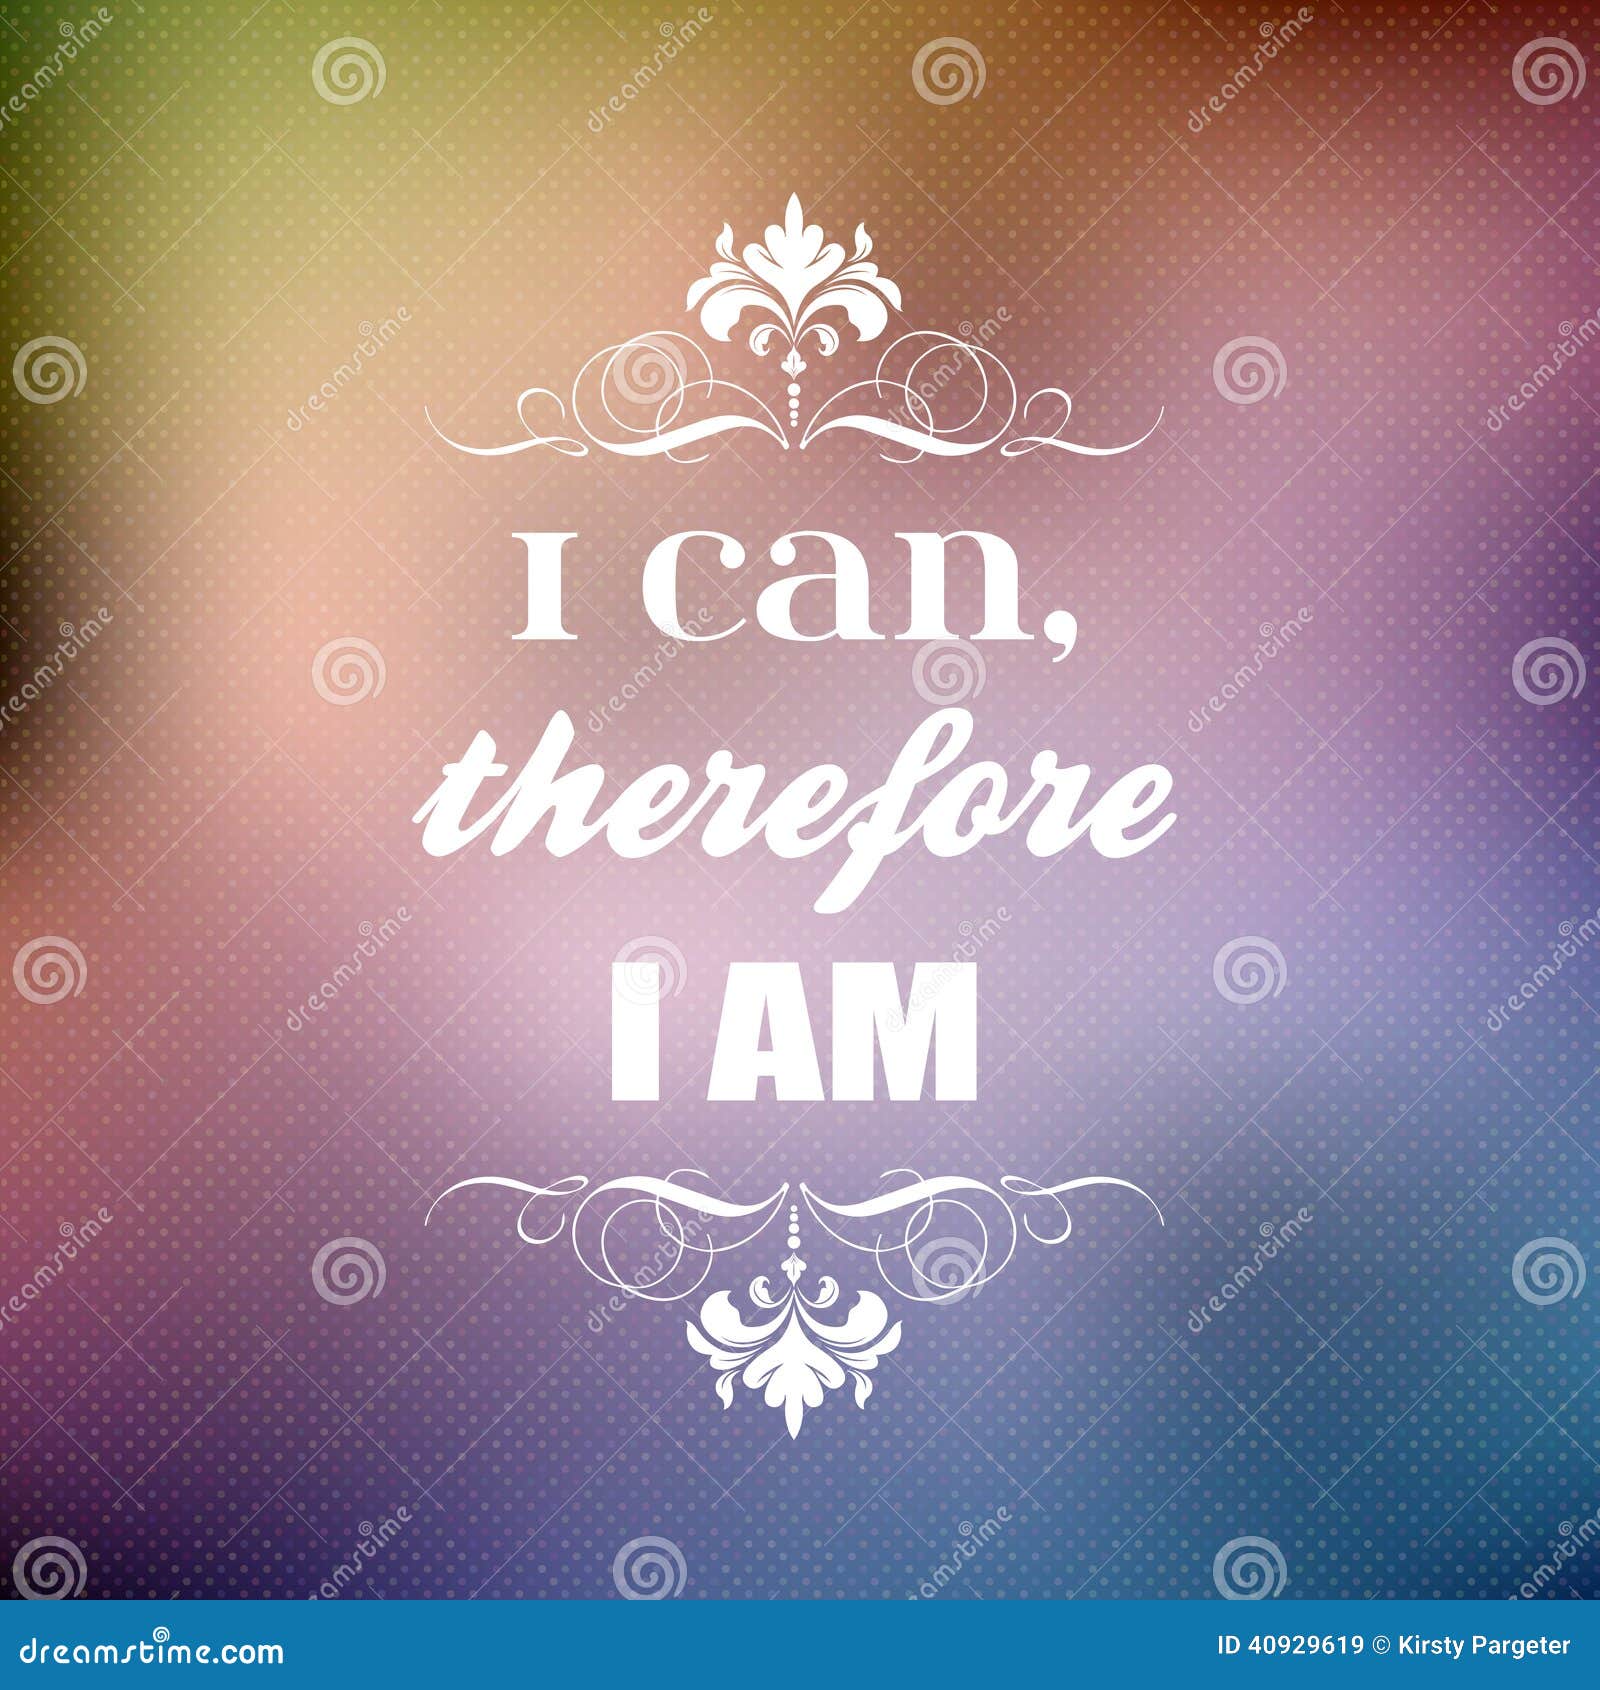 Inspirational Quote Background Stock Vector - Illustration of inspire ...